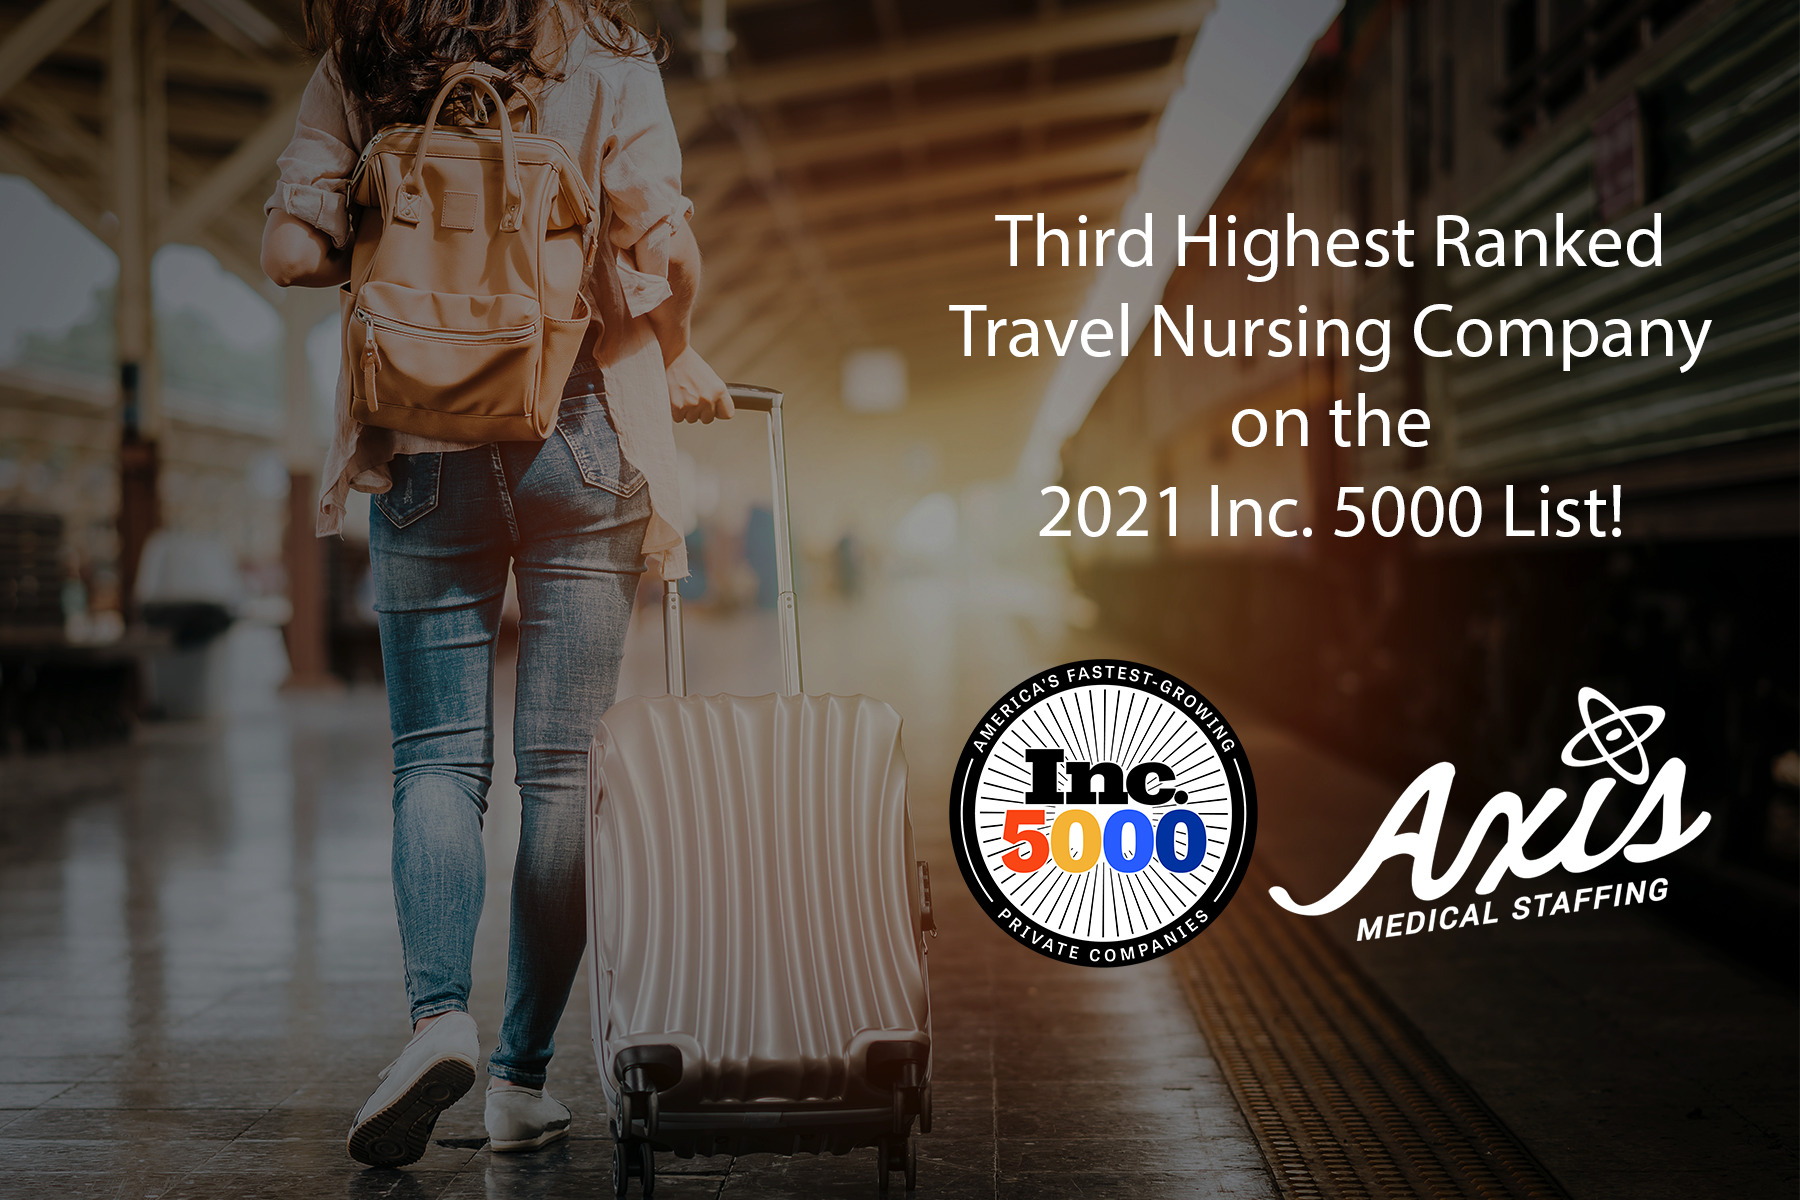 Axis Medical Staffing is the 3rd Highest Ranked Travel Nursing Company on the 2021 Inc. 5000 List!